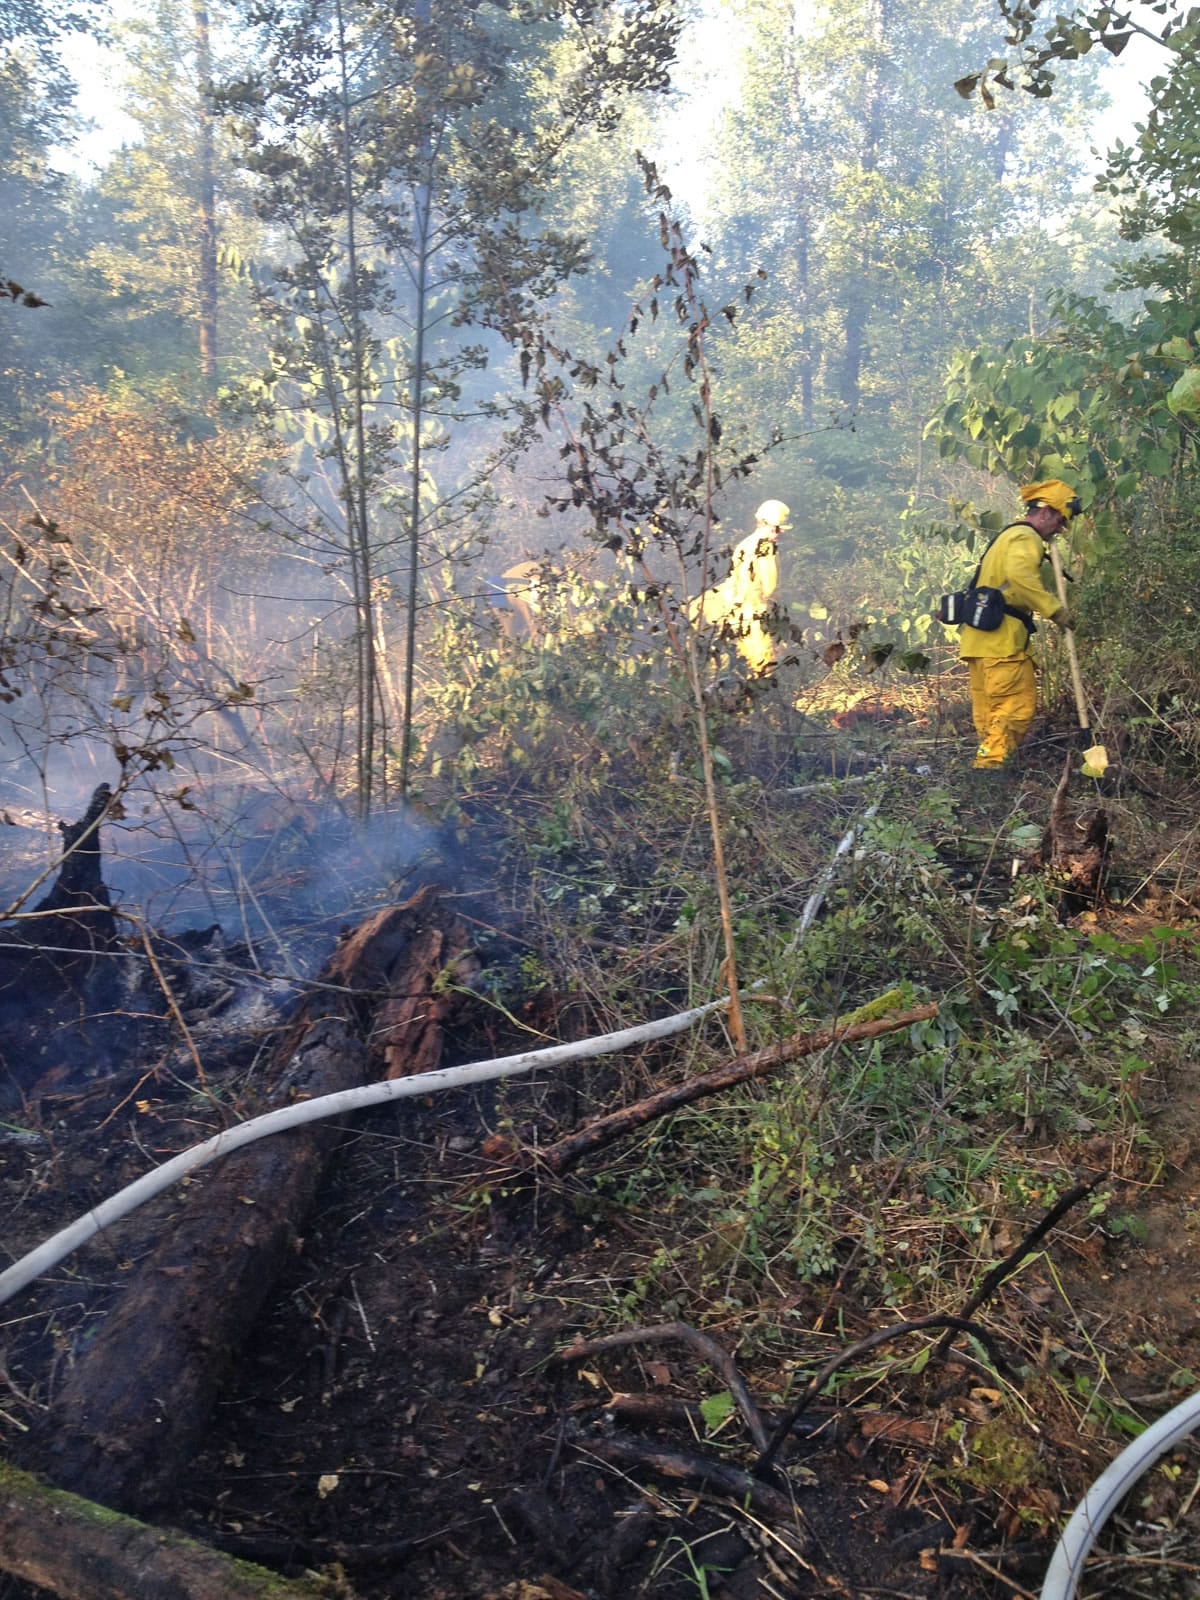 Firefighters hose down a forest fire that burned through nearly 2 acres Tuesday evening in north Clark County along the East Fork Lewis River.